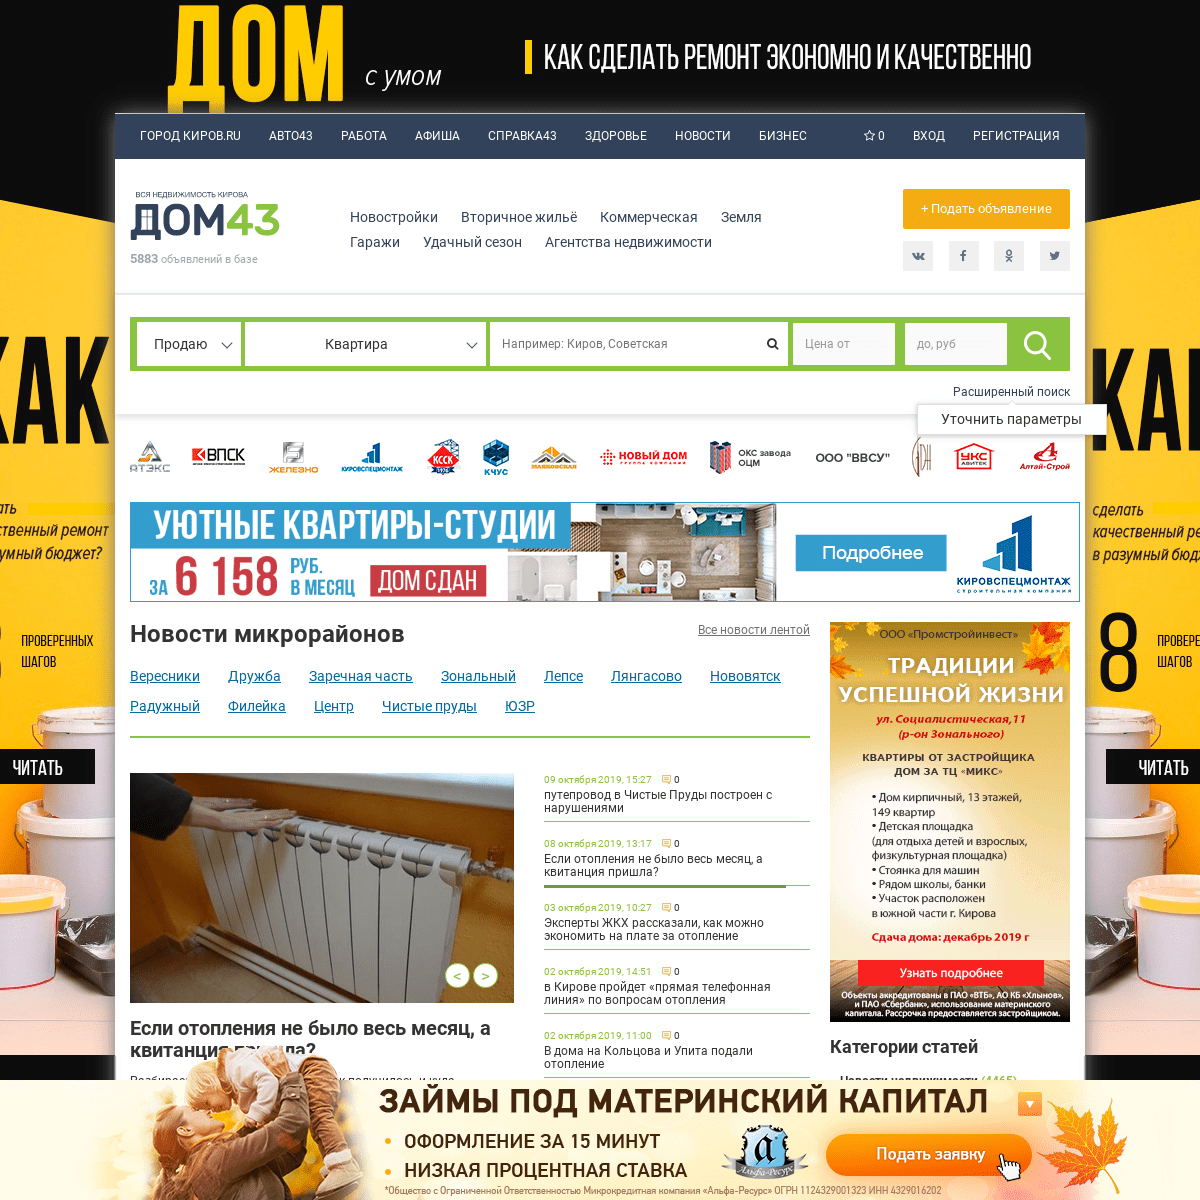 A complete backup of dom43.ru